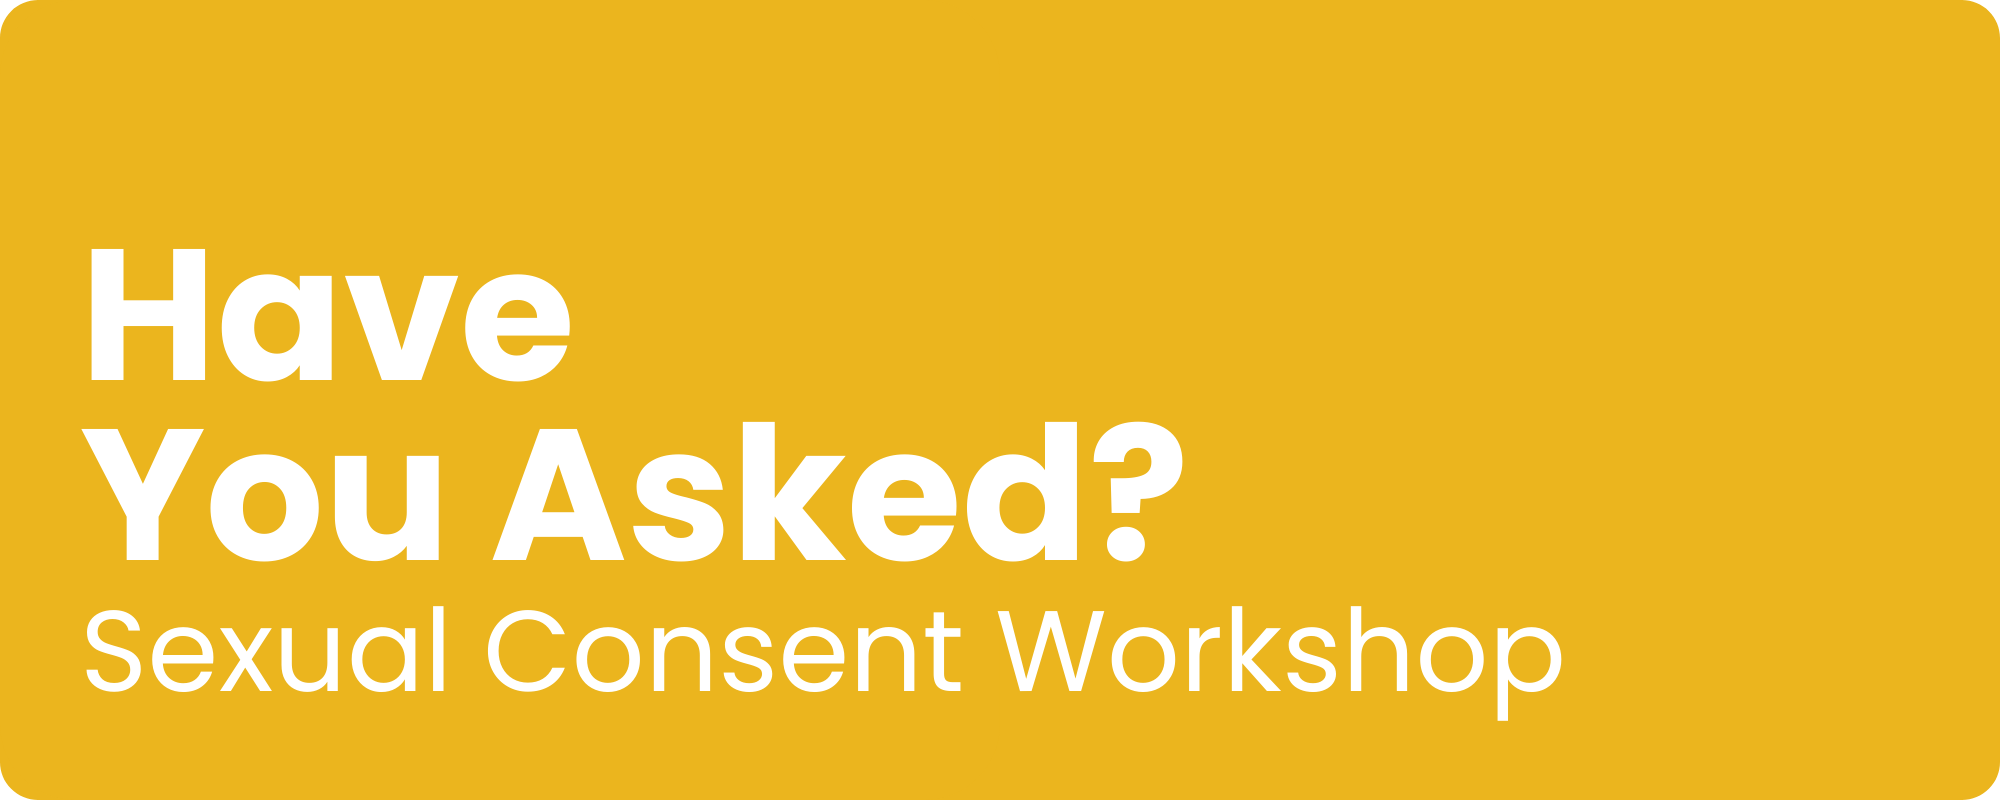 Have You Asked? - Sexual Consent Workshop